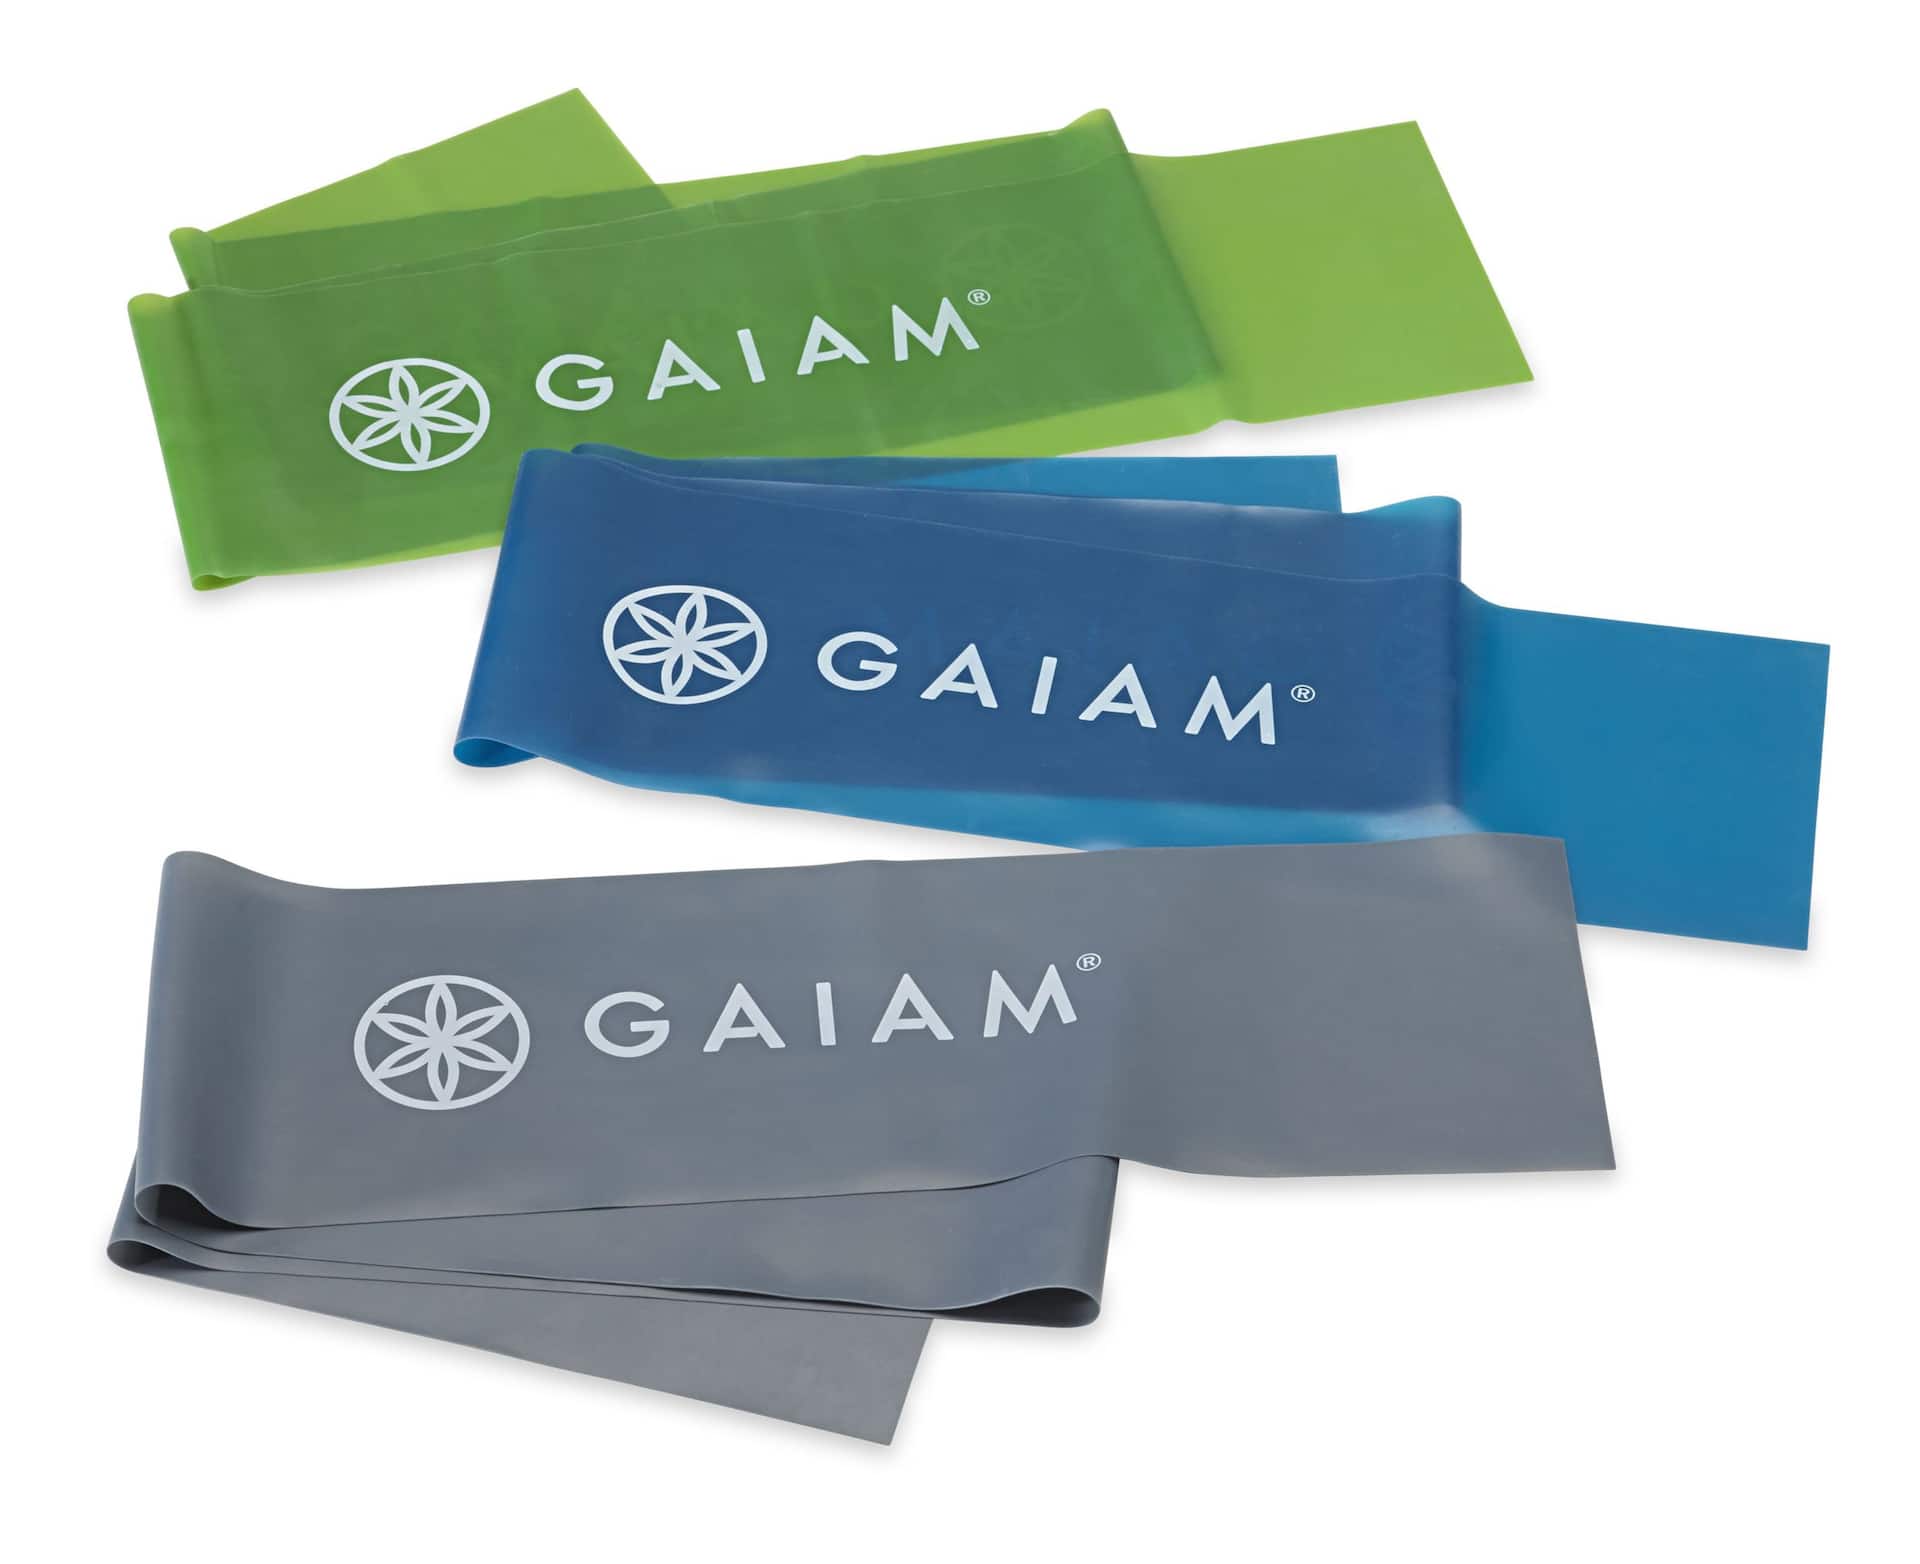 Gaiam Loop Band Kit, Includes Light, Medium and Heavy Resistance